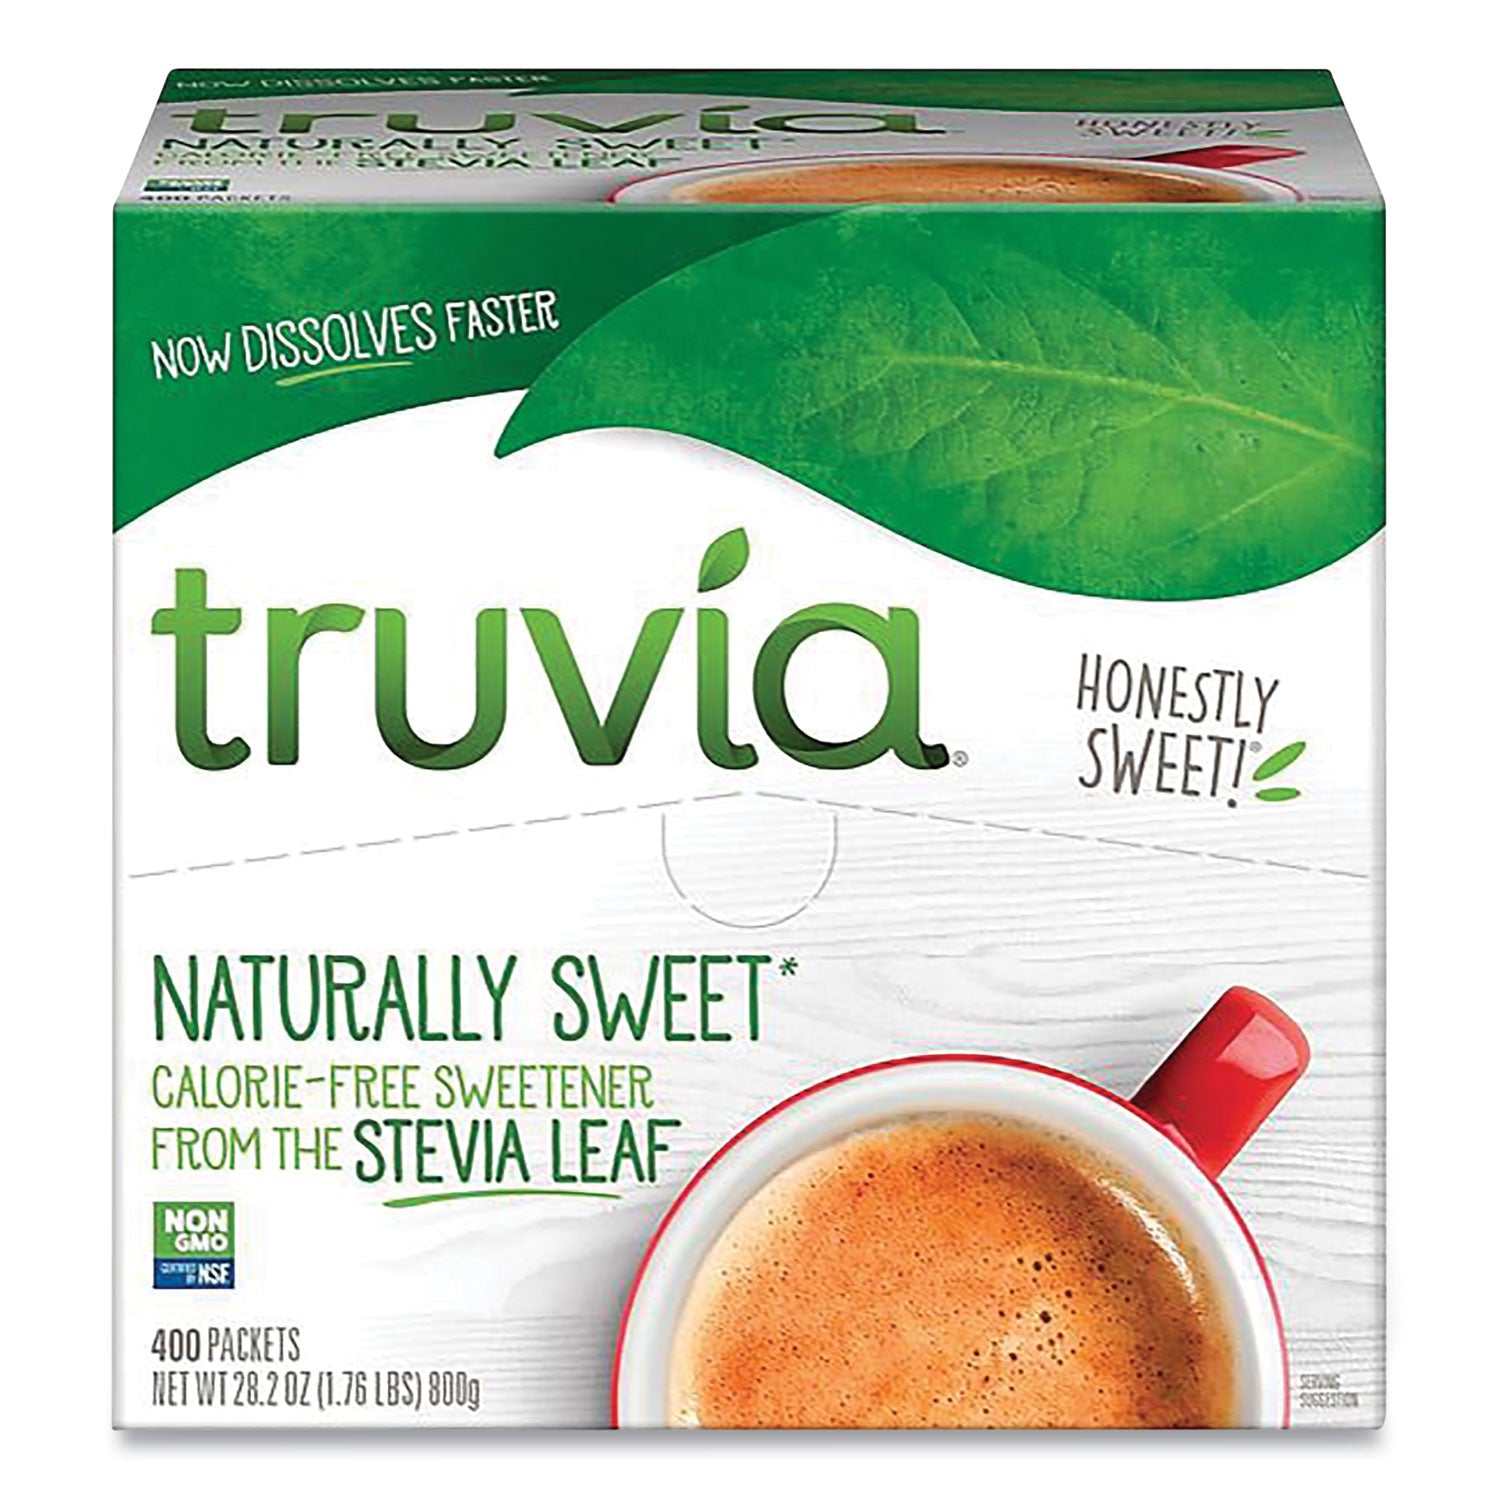 natural-sugar-substitute-007-oz-packet-400-packets-box_trubbd02056 - 1